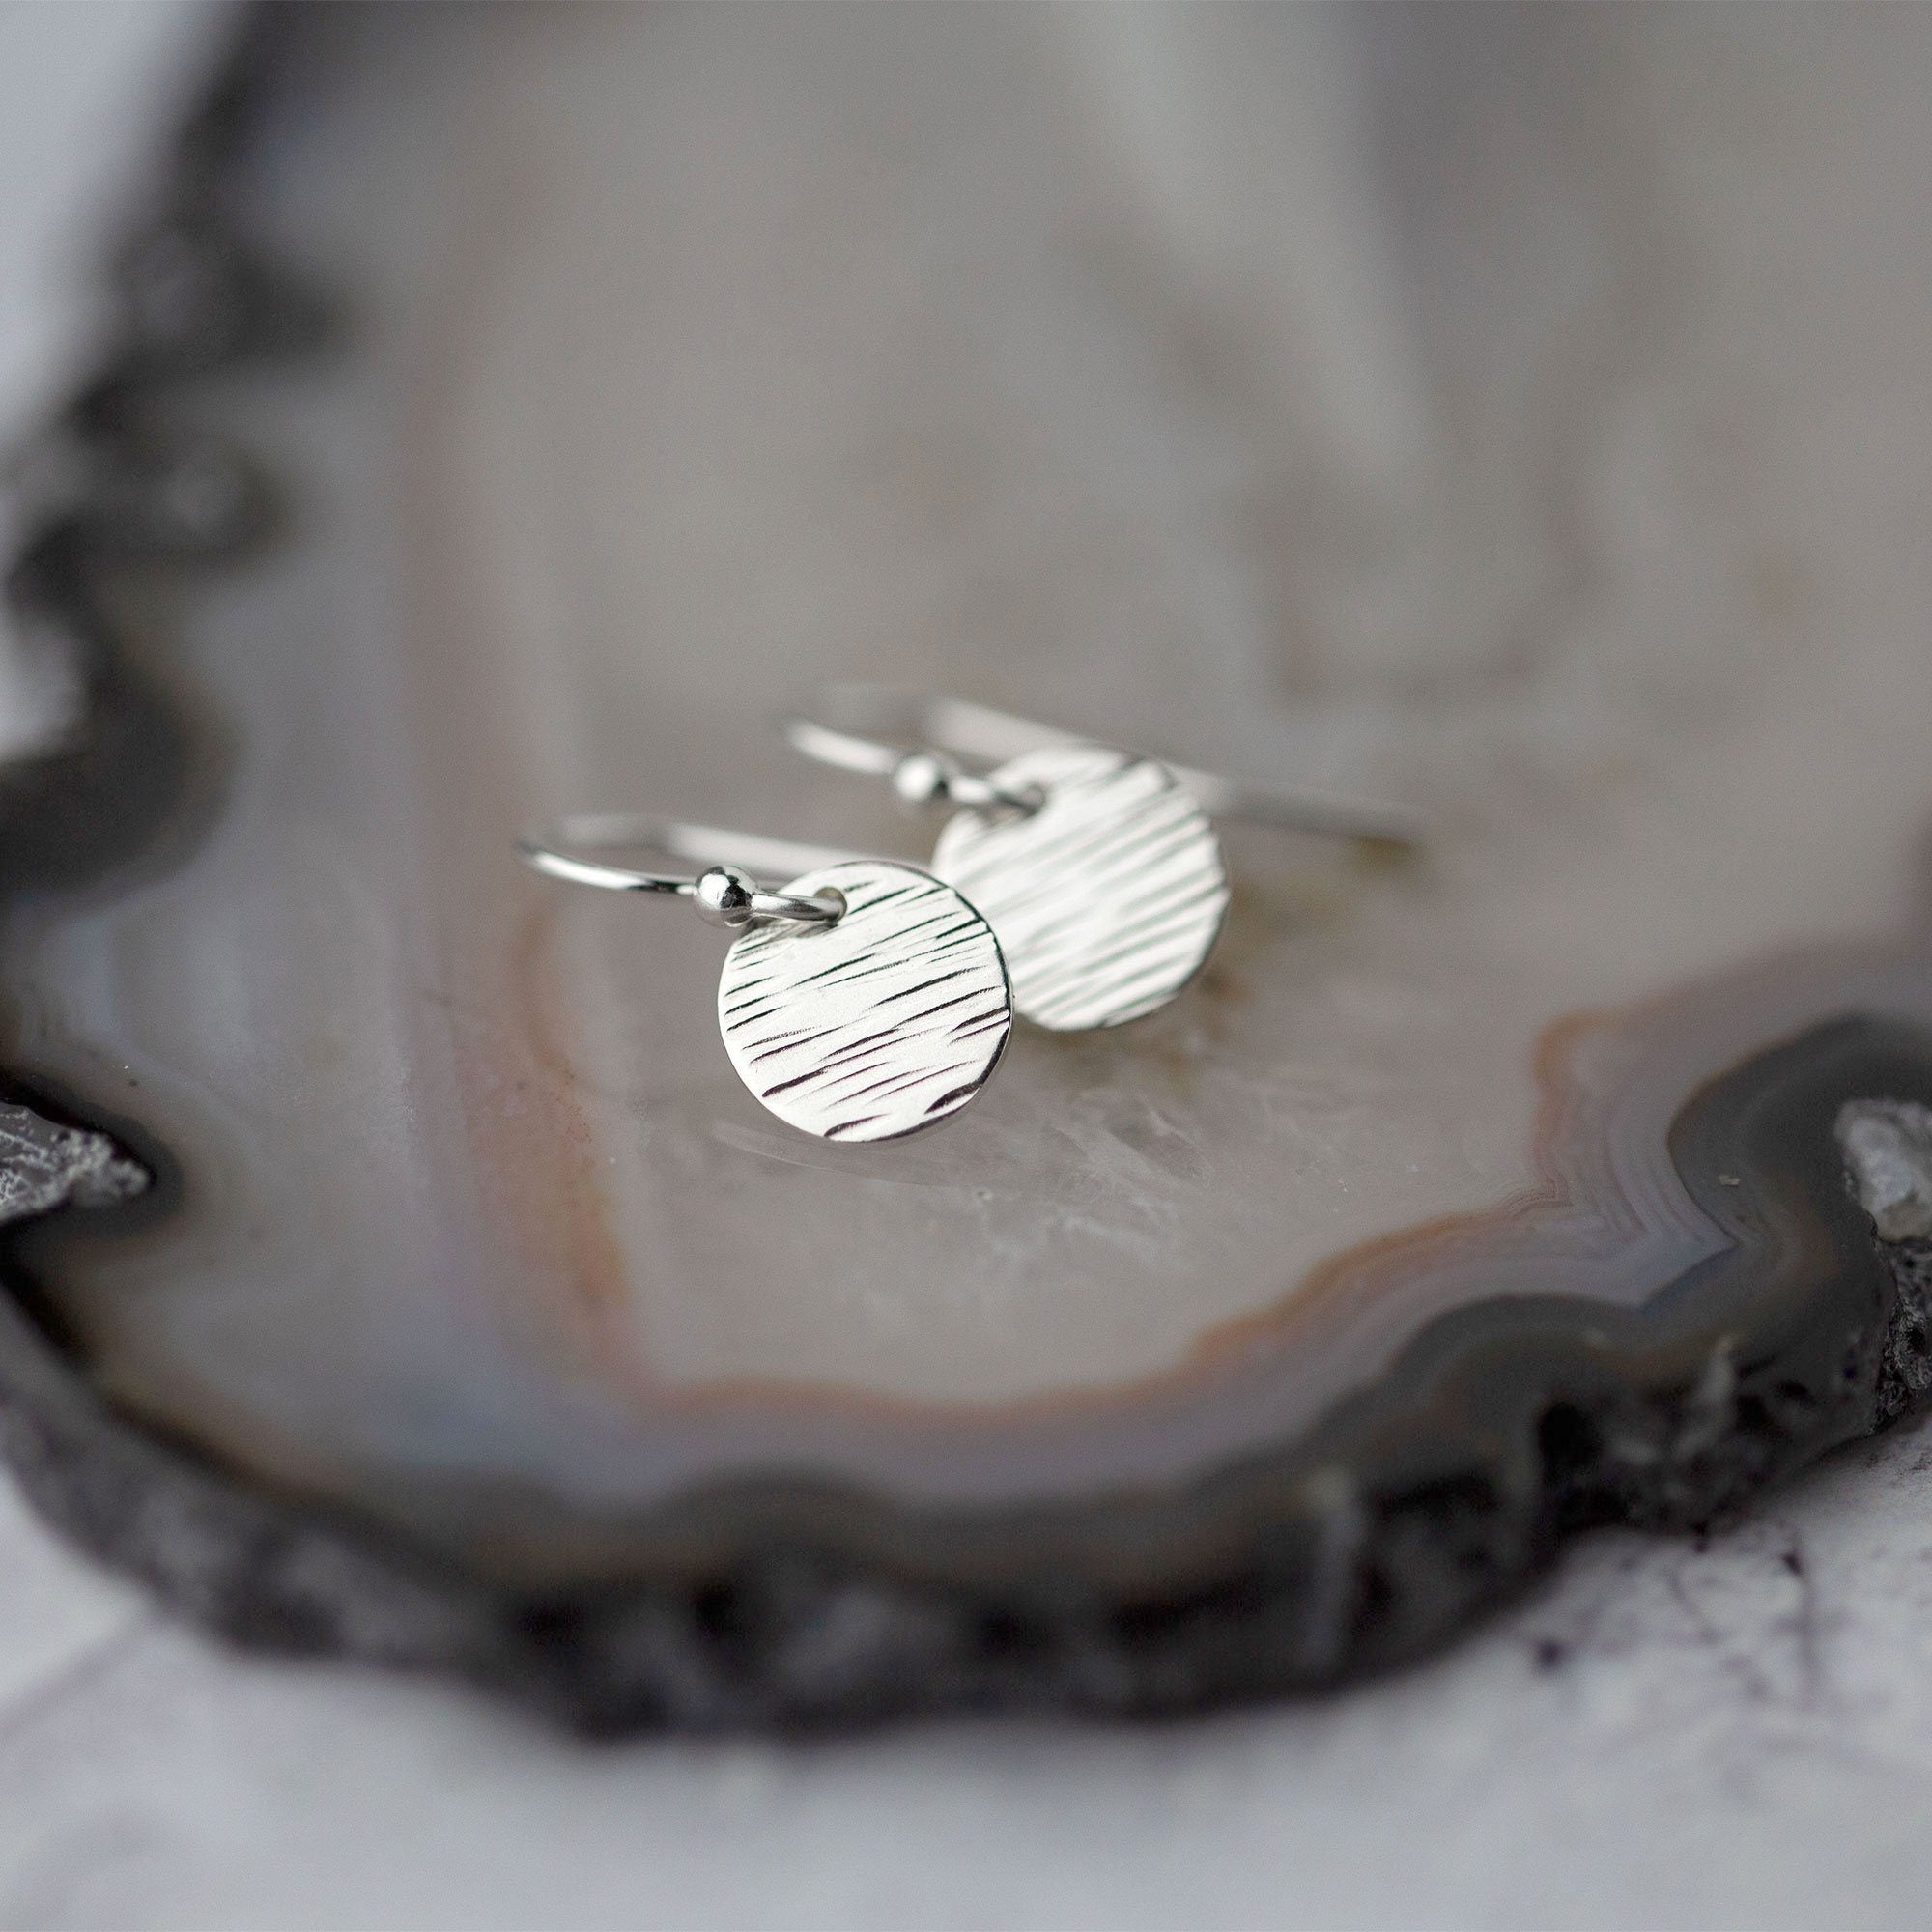 Silver Textured Disc Earrings - Handmade Jewelry by Burnish